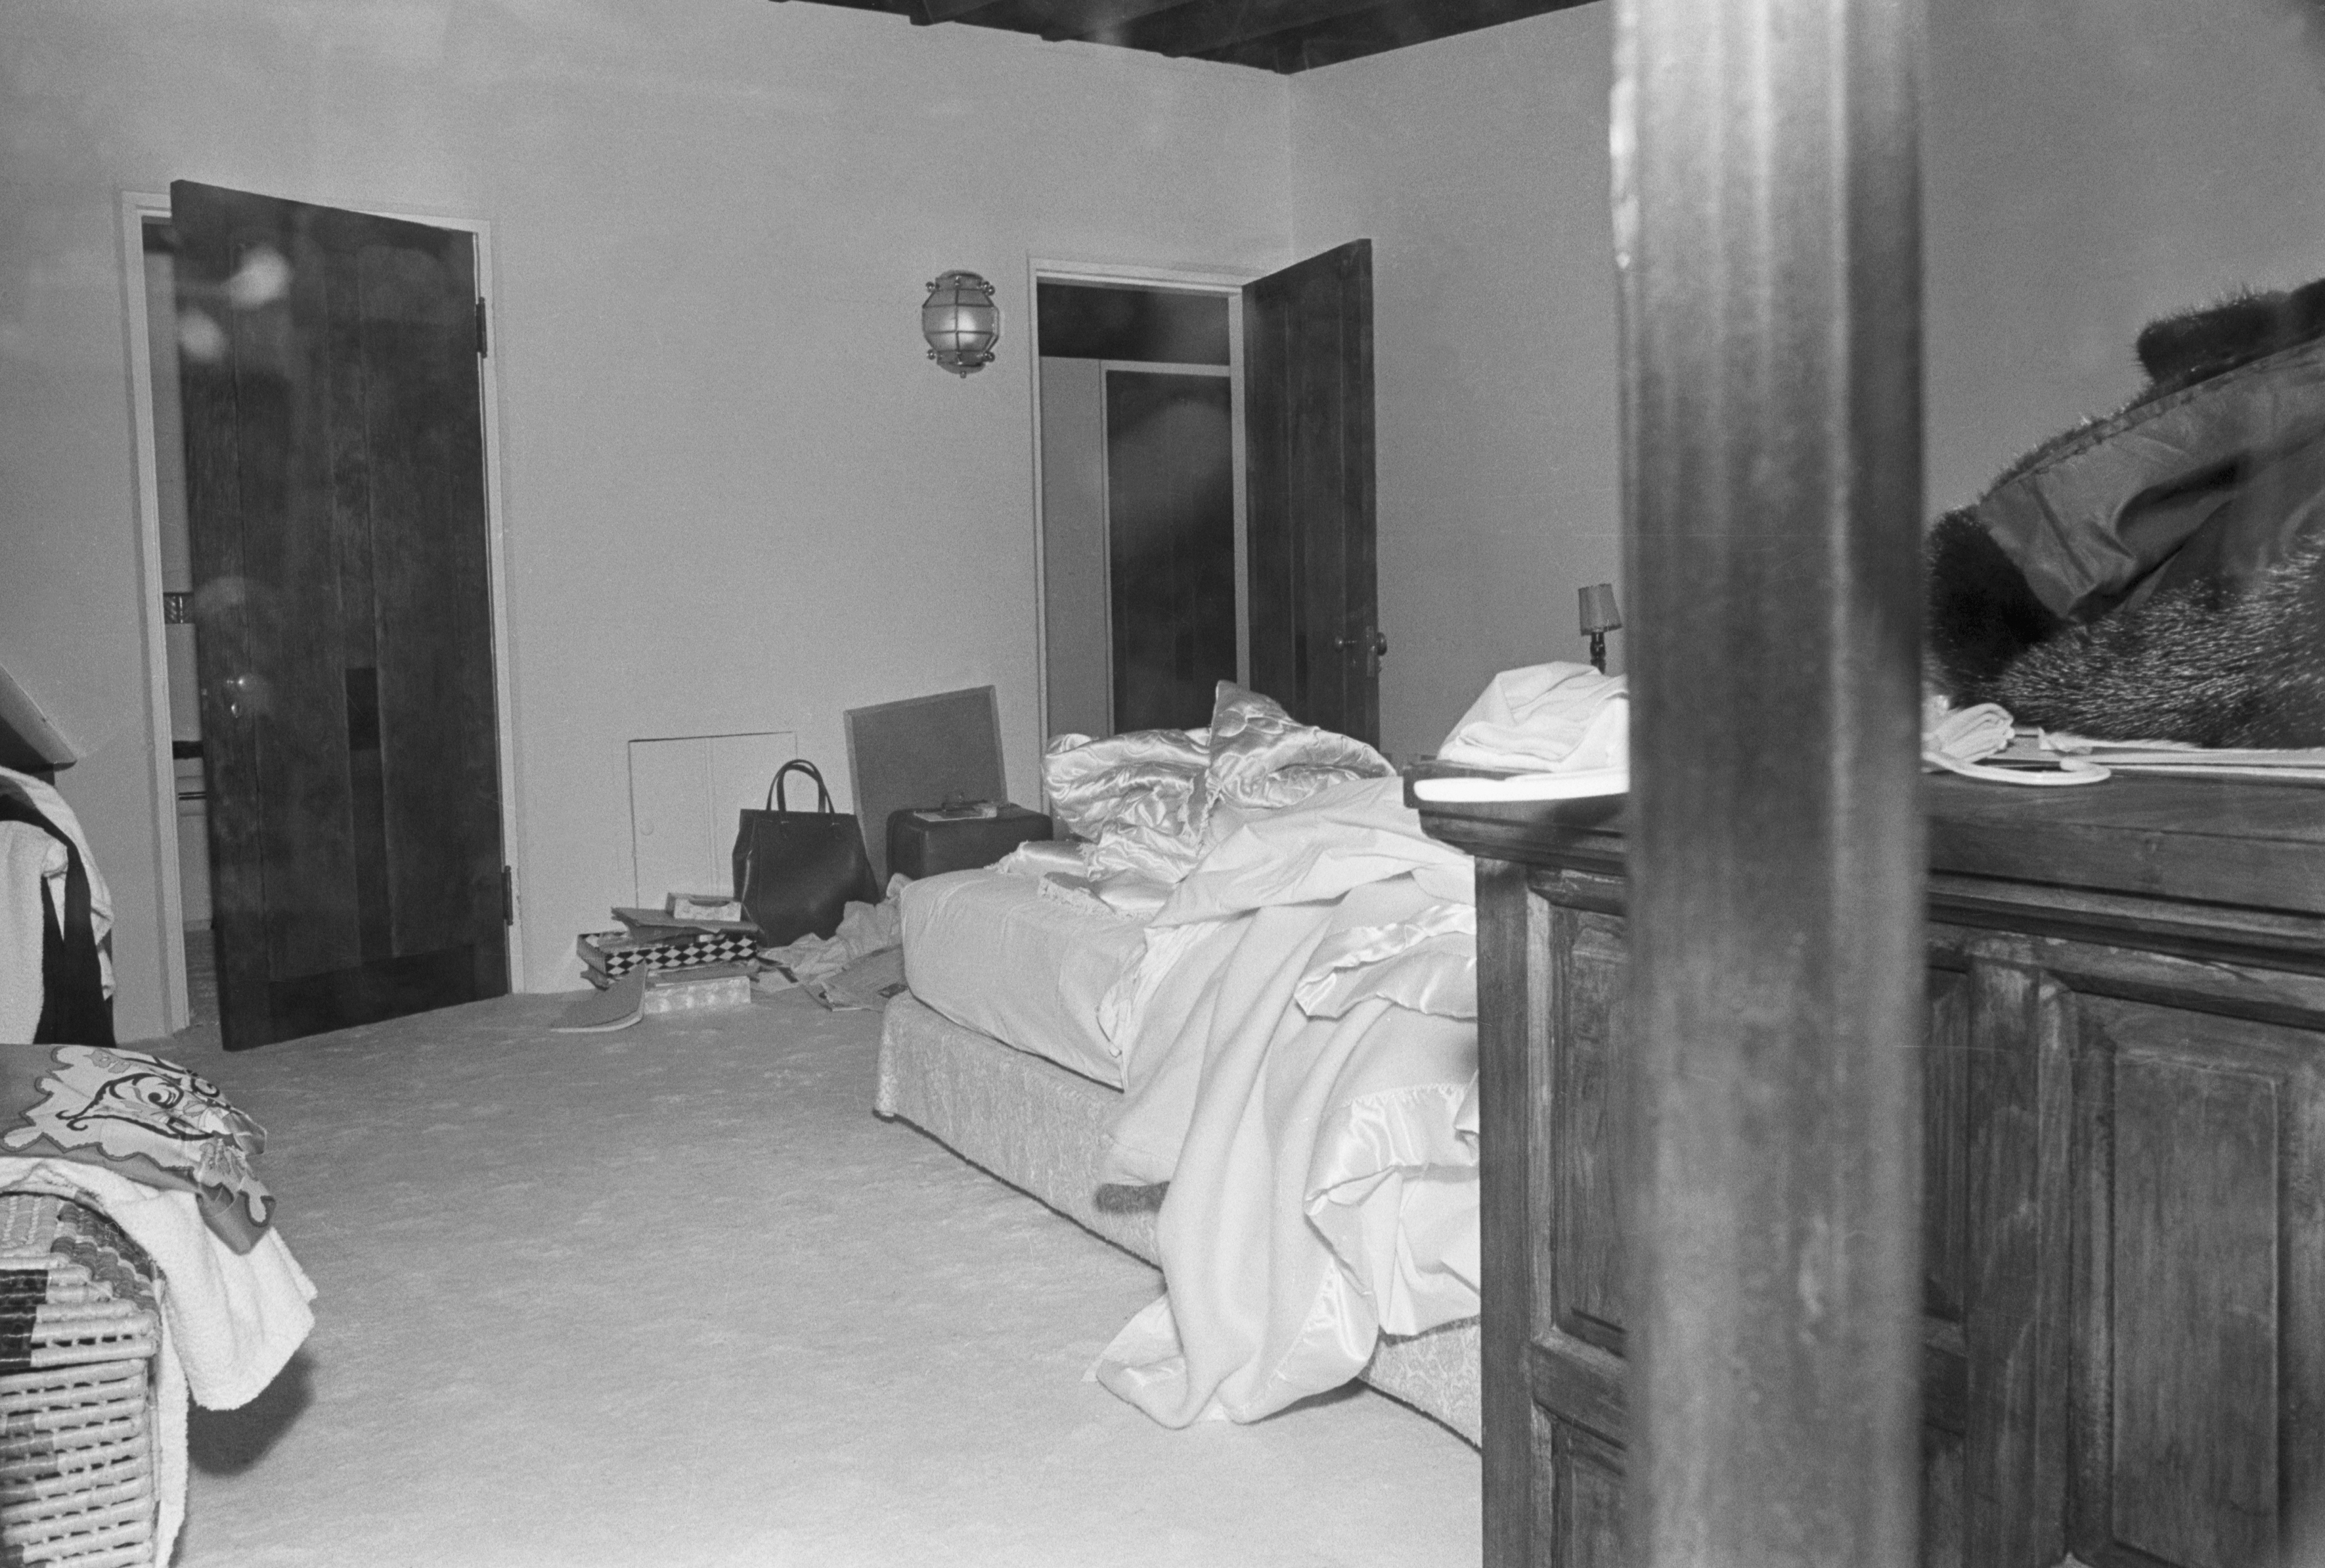 The bedroom where Marilyn Monroe was found deceased on August 6, 1962 | Source: Getty Images